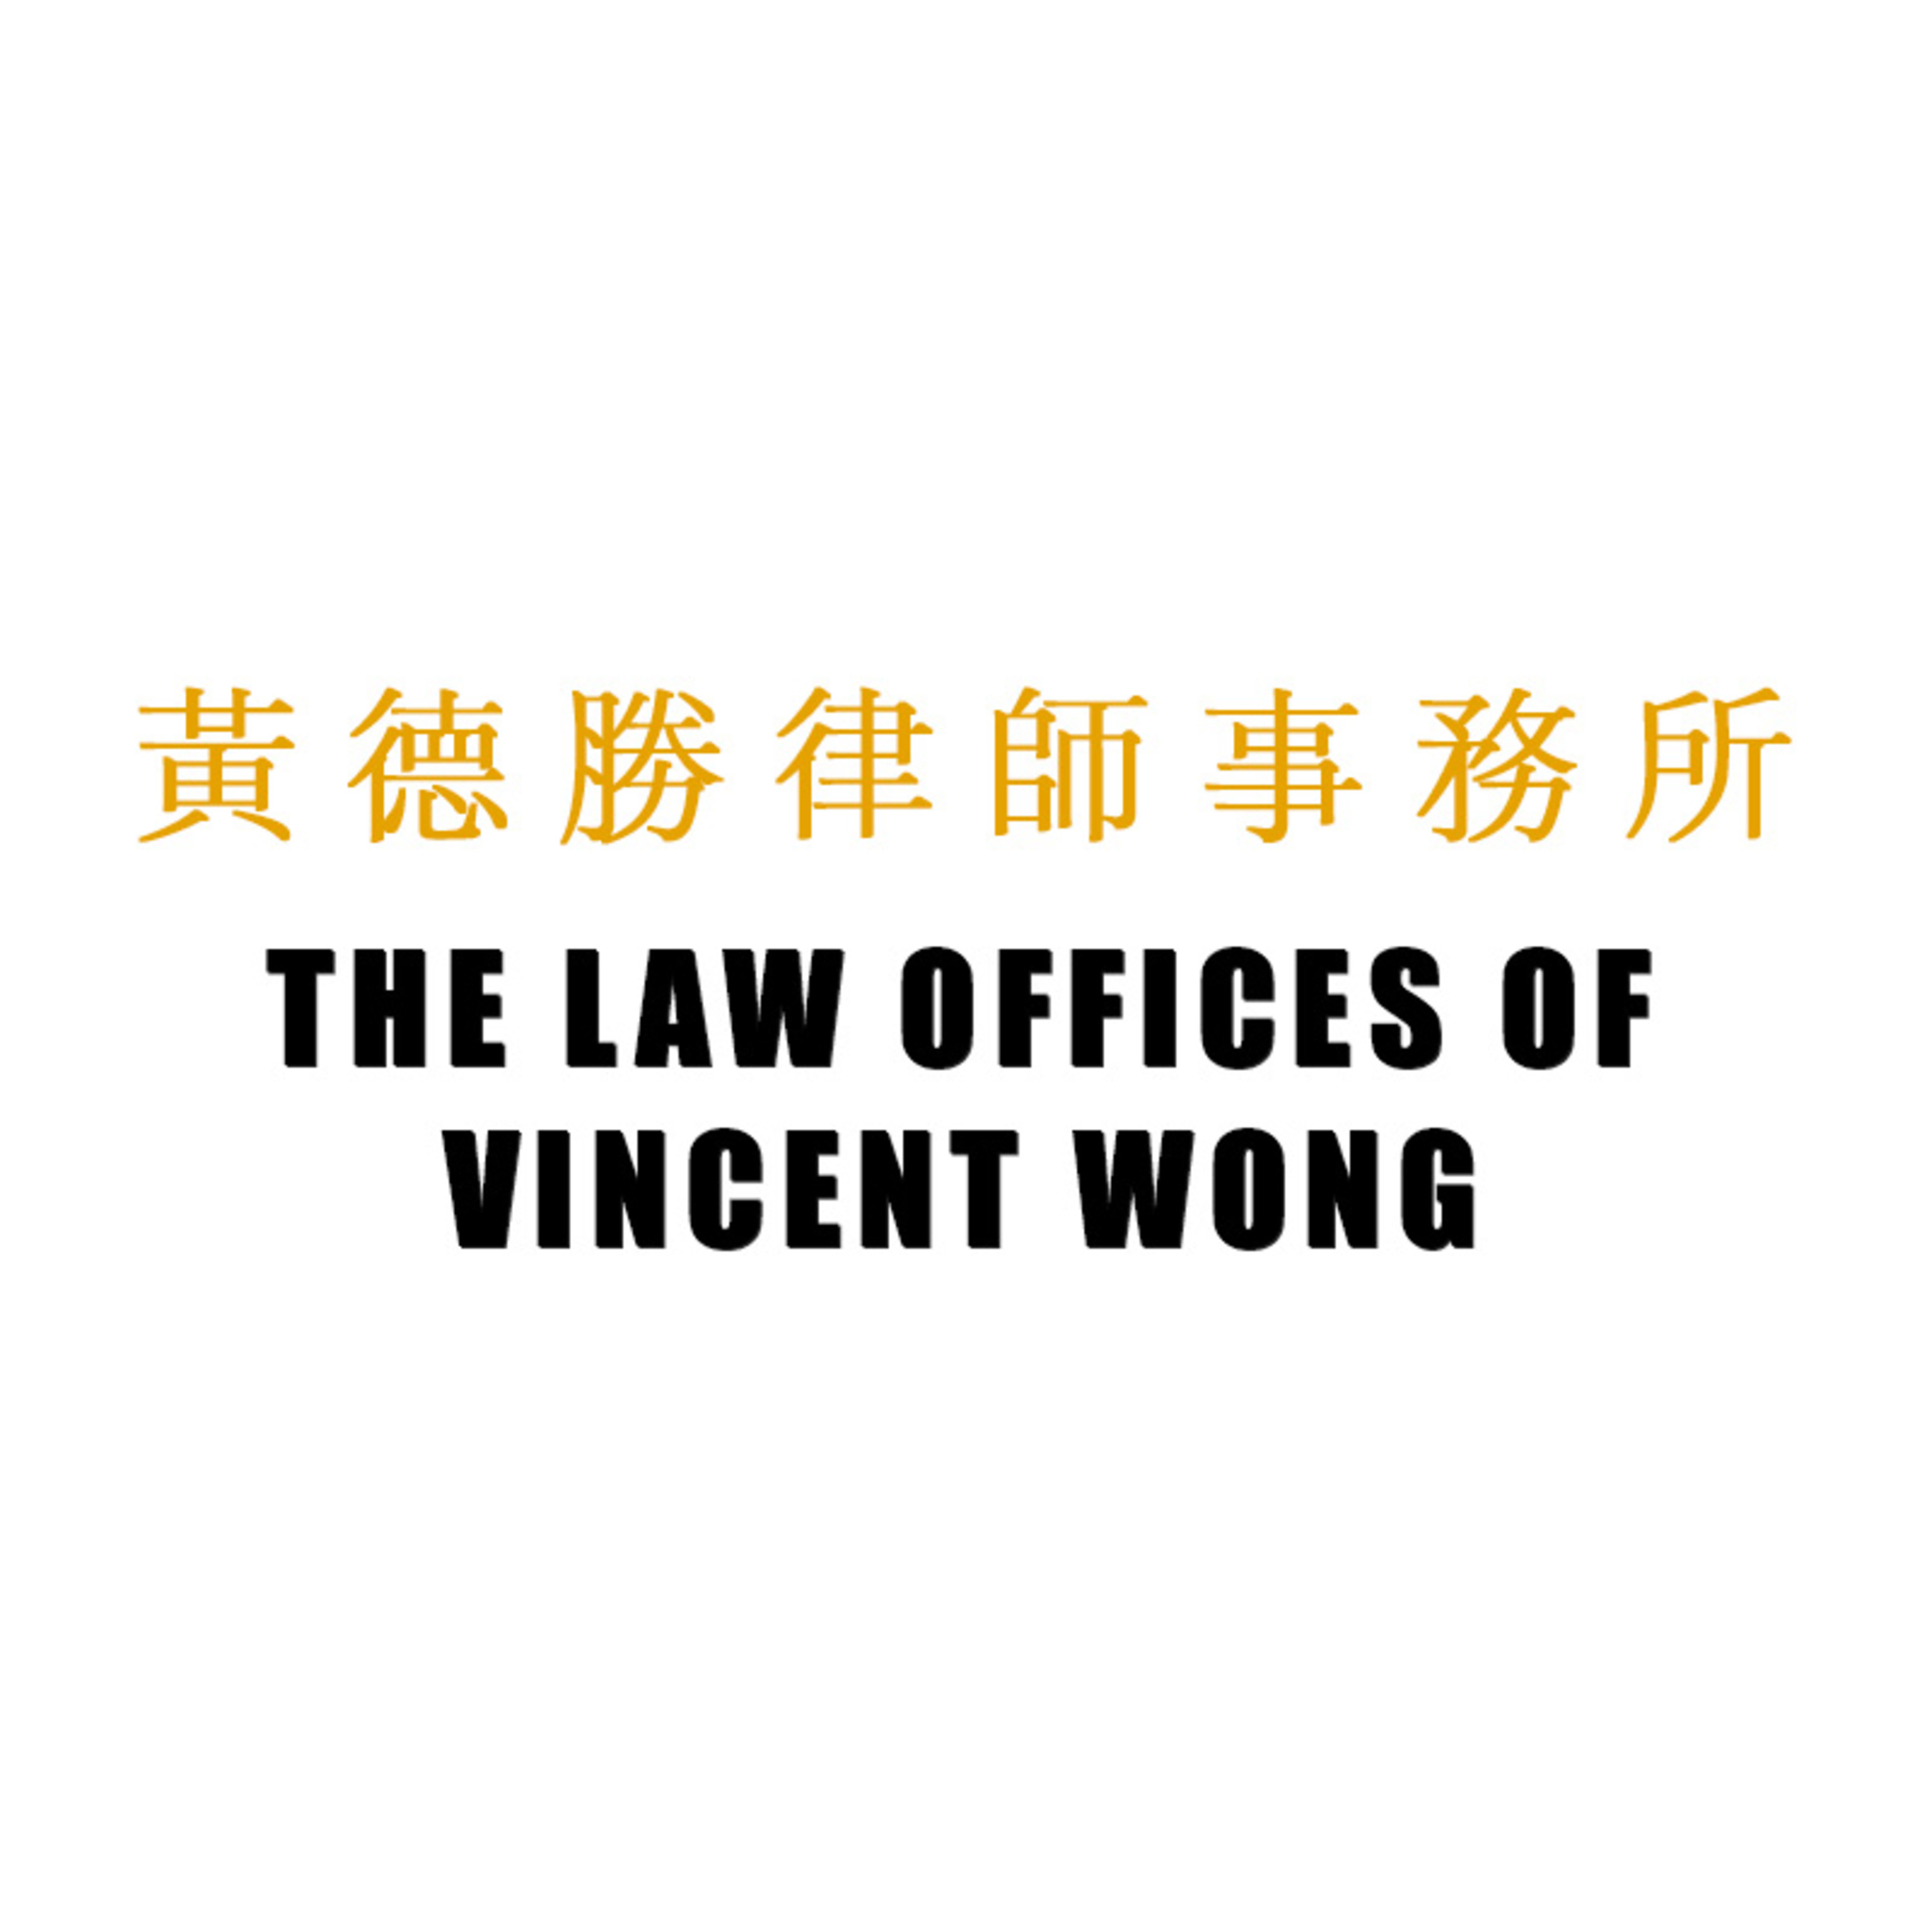 The Law Offices of Vincent Wong